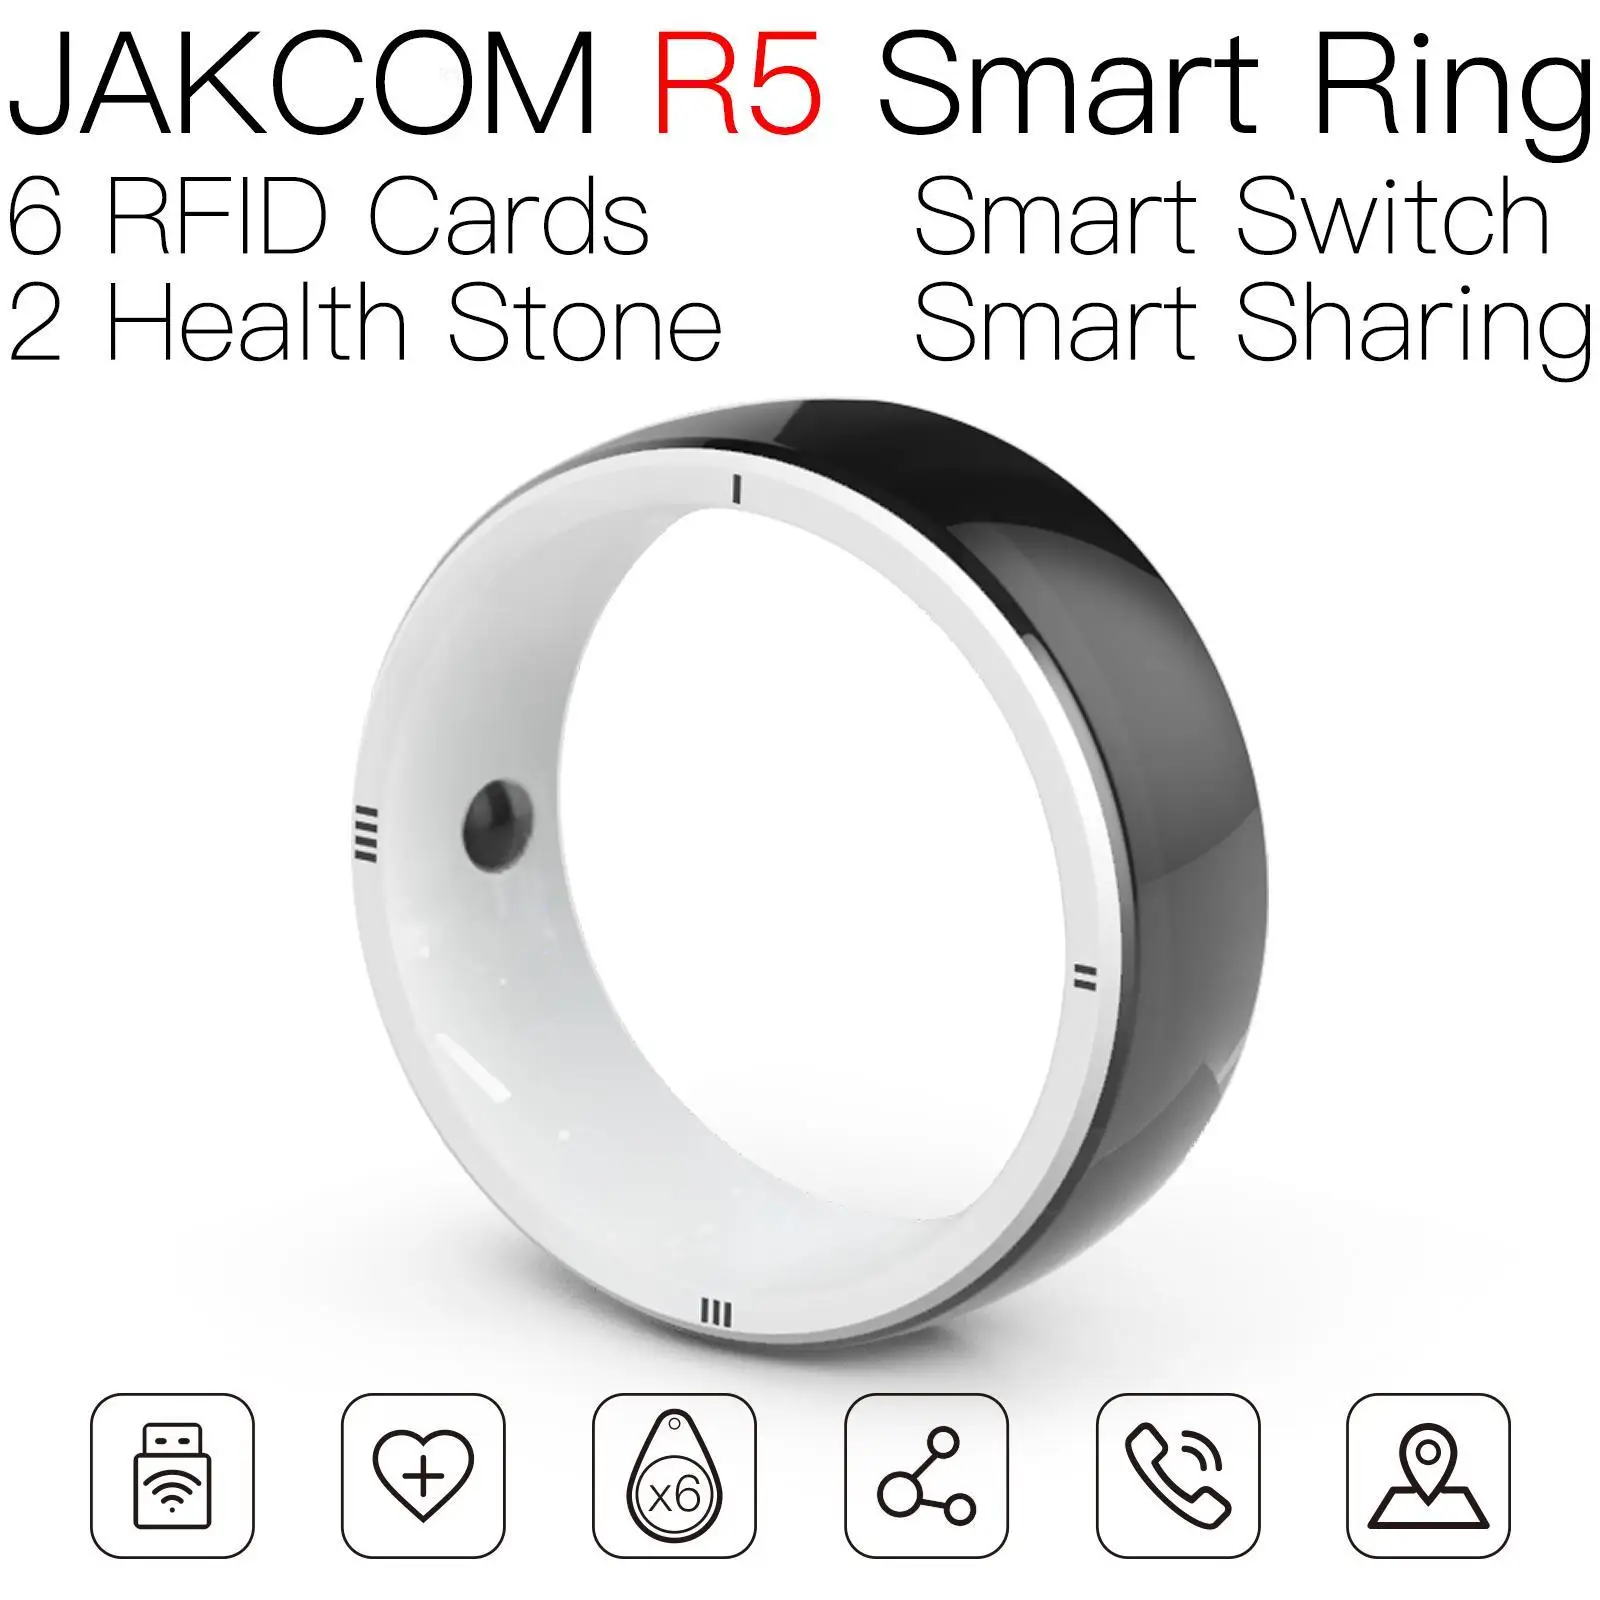 

JAKCOM R5 Smart Ring Newer than memary chip nfc 1k classic uid changed contactless reader for pigeon uhf rfid tag